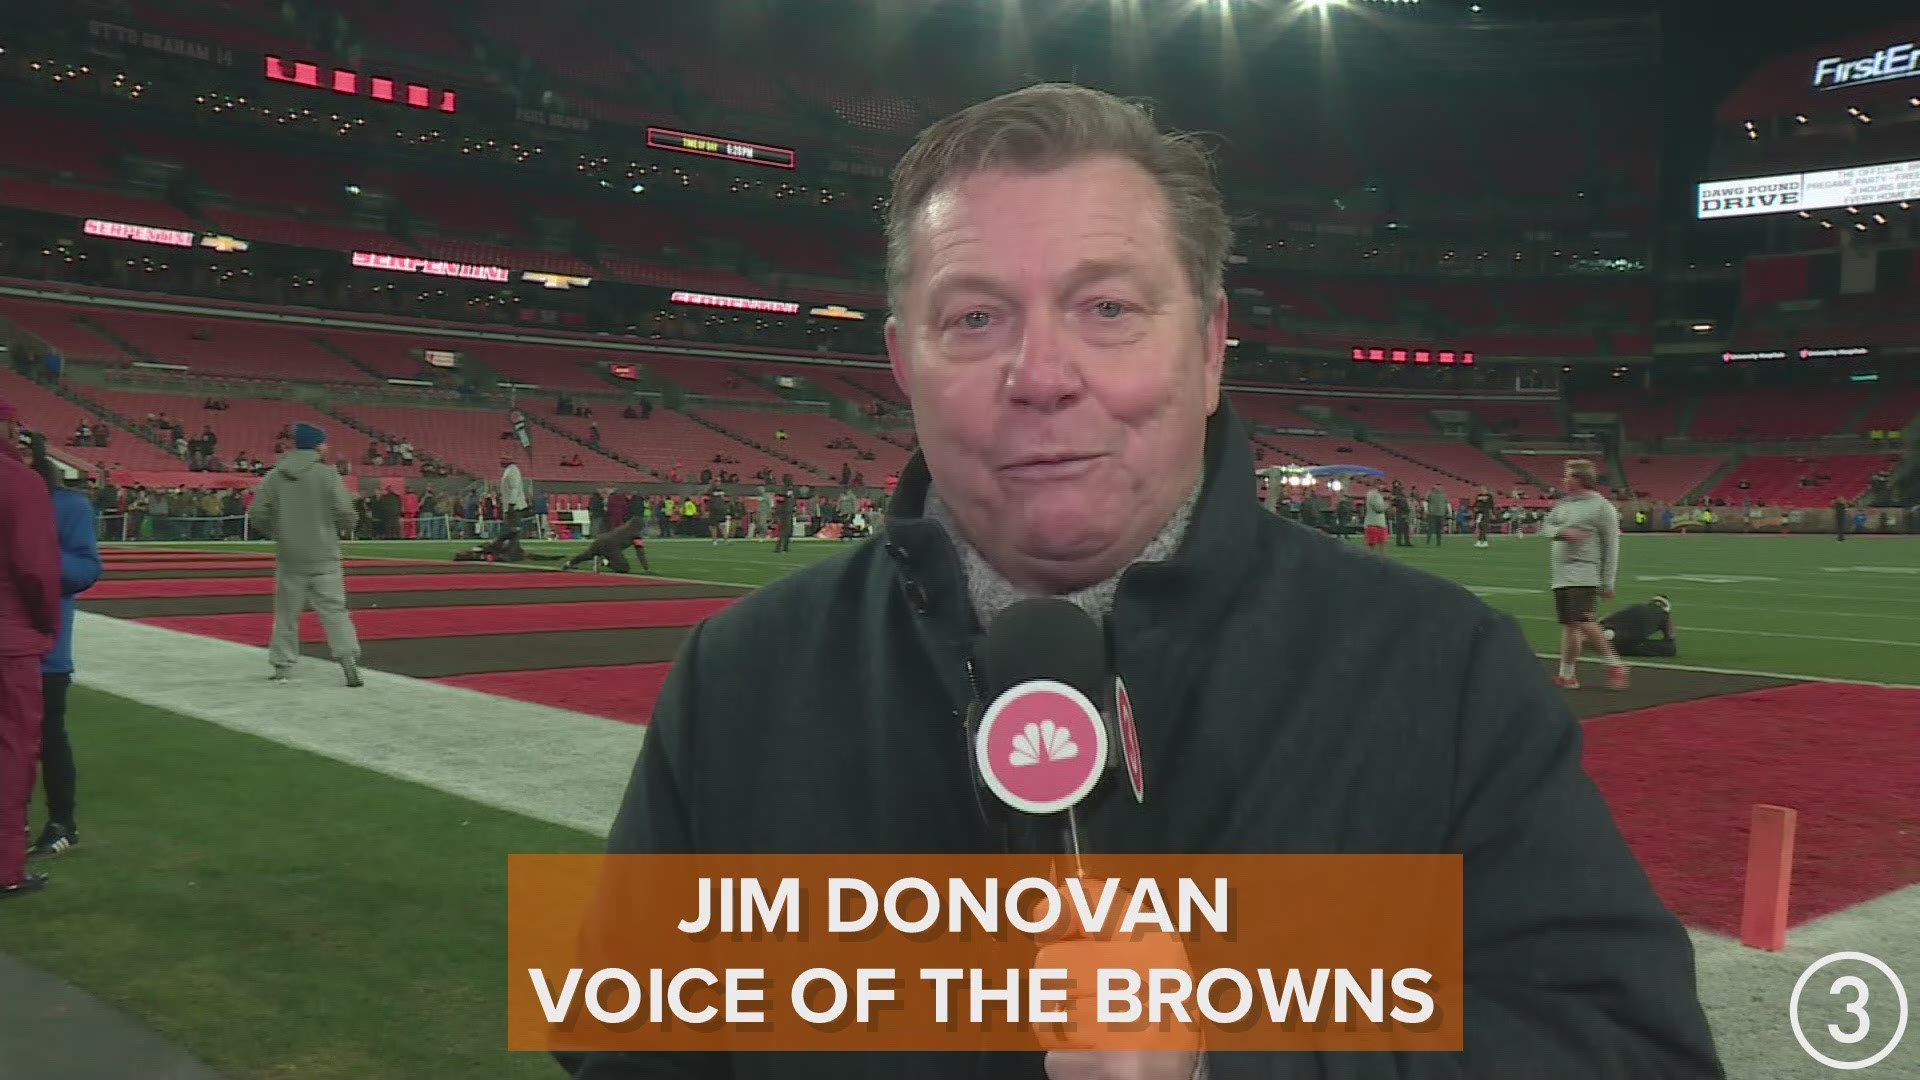 Keys to a win!  'The Voice of the Browns' is looking for improvement in the red zone and for Baker Mayfield to have under 30 pass attempts as a pathway to victory.